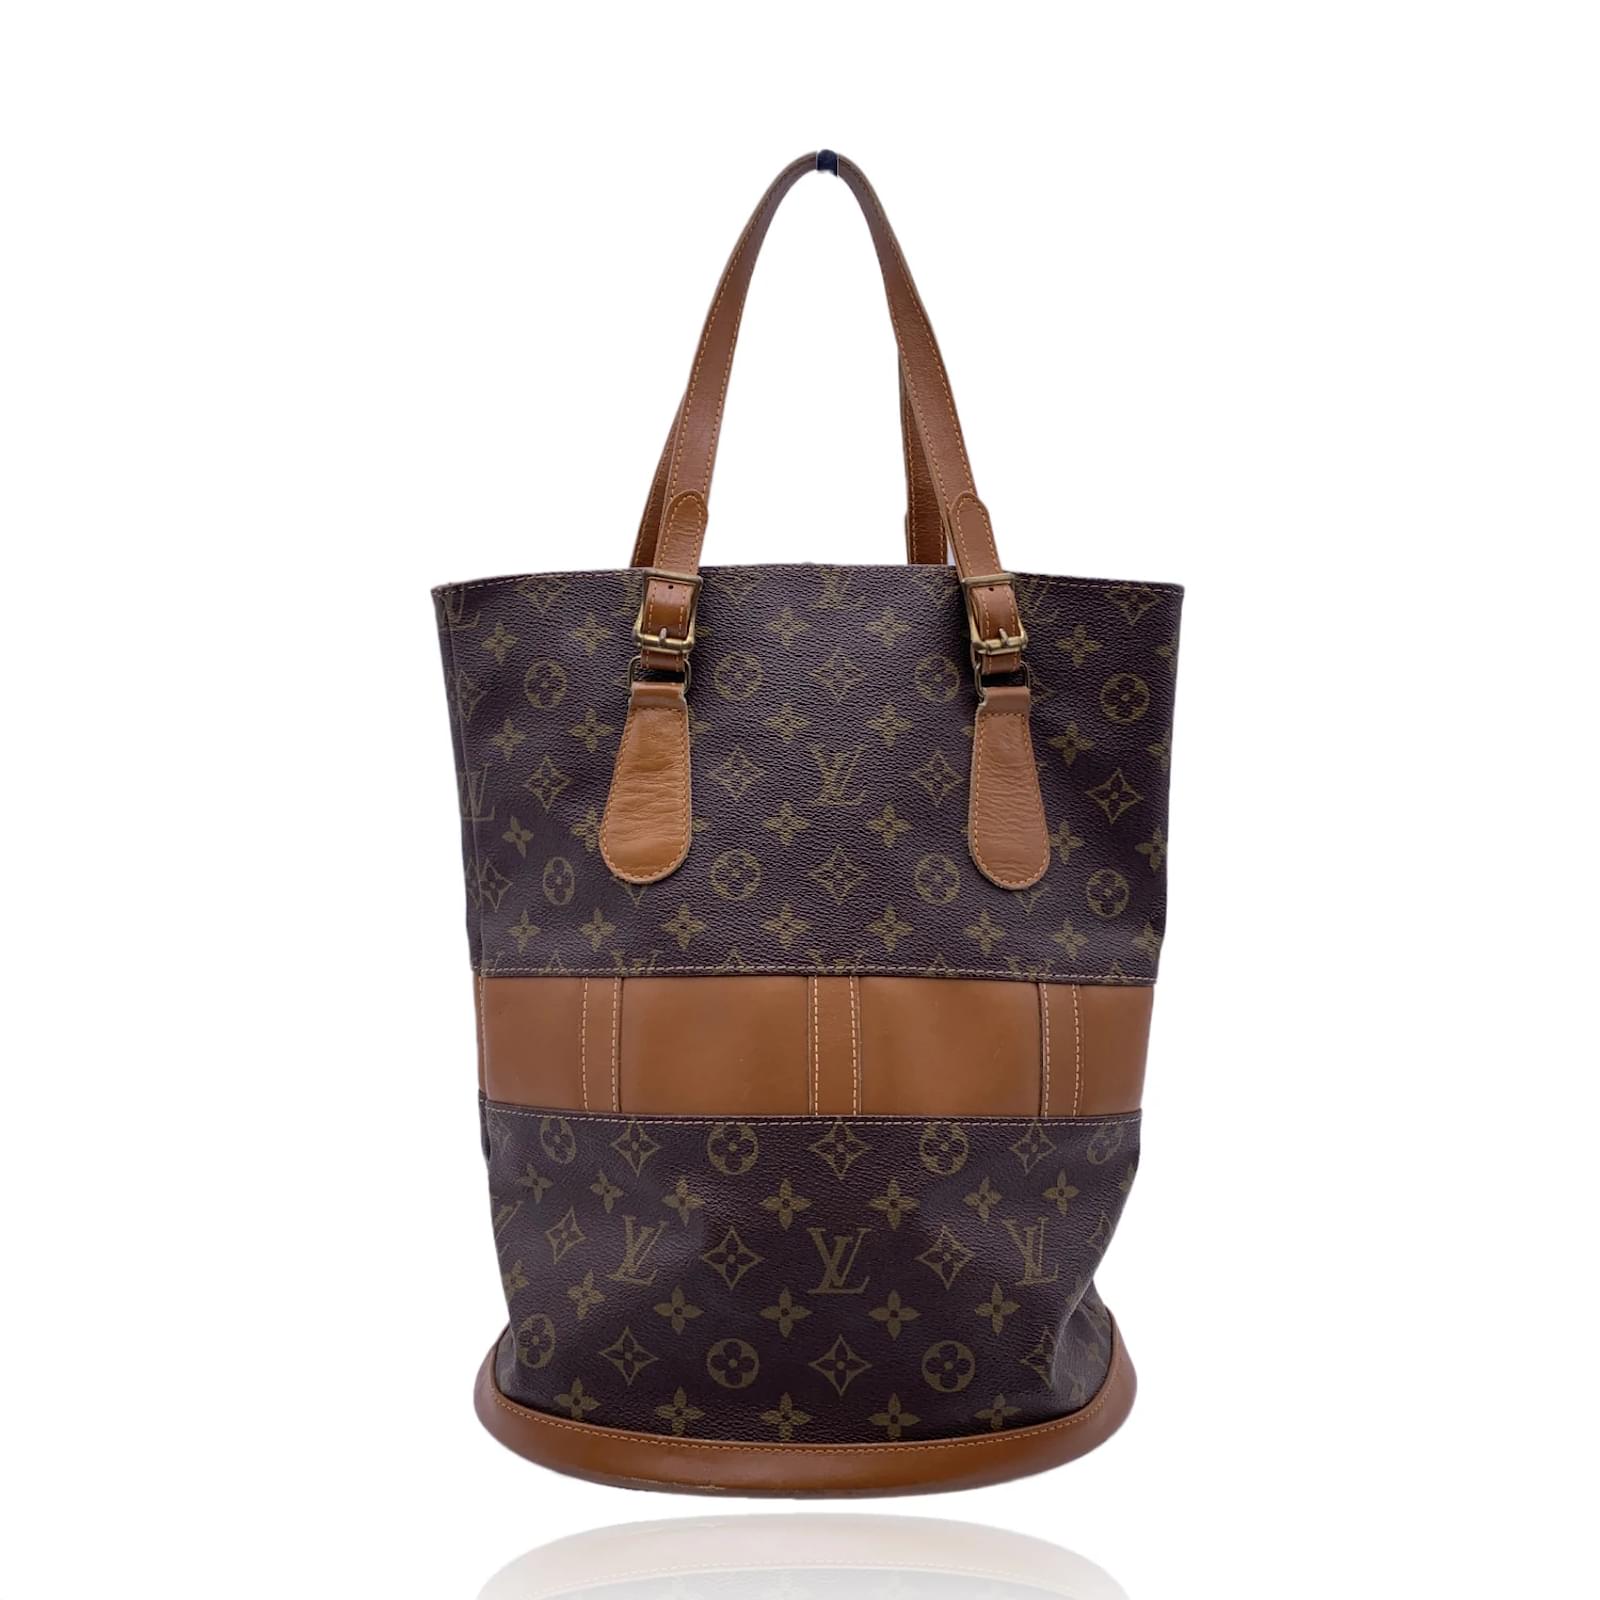 Can Louis Vuitton Bags Be Made In Usa